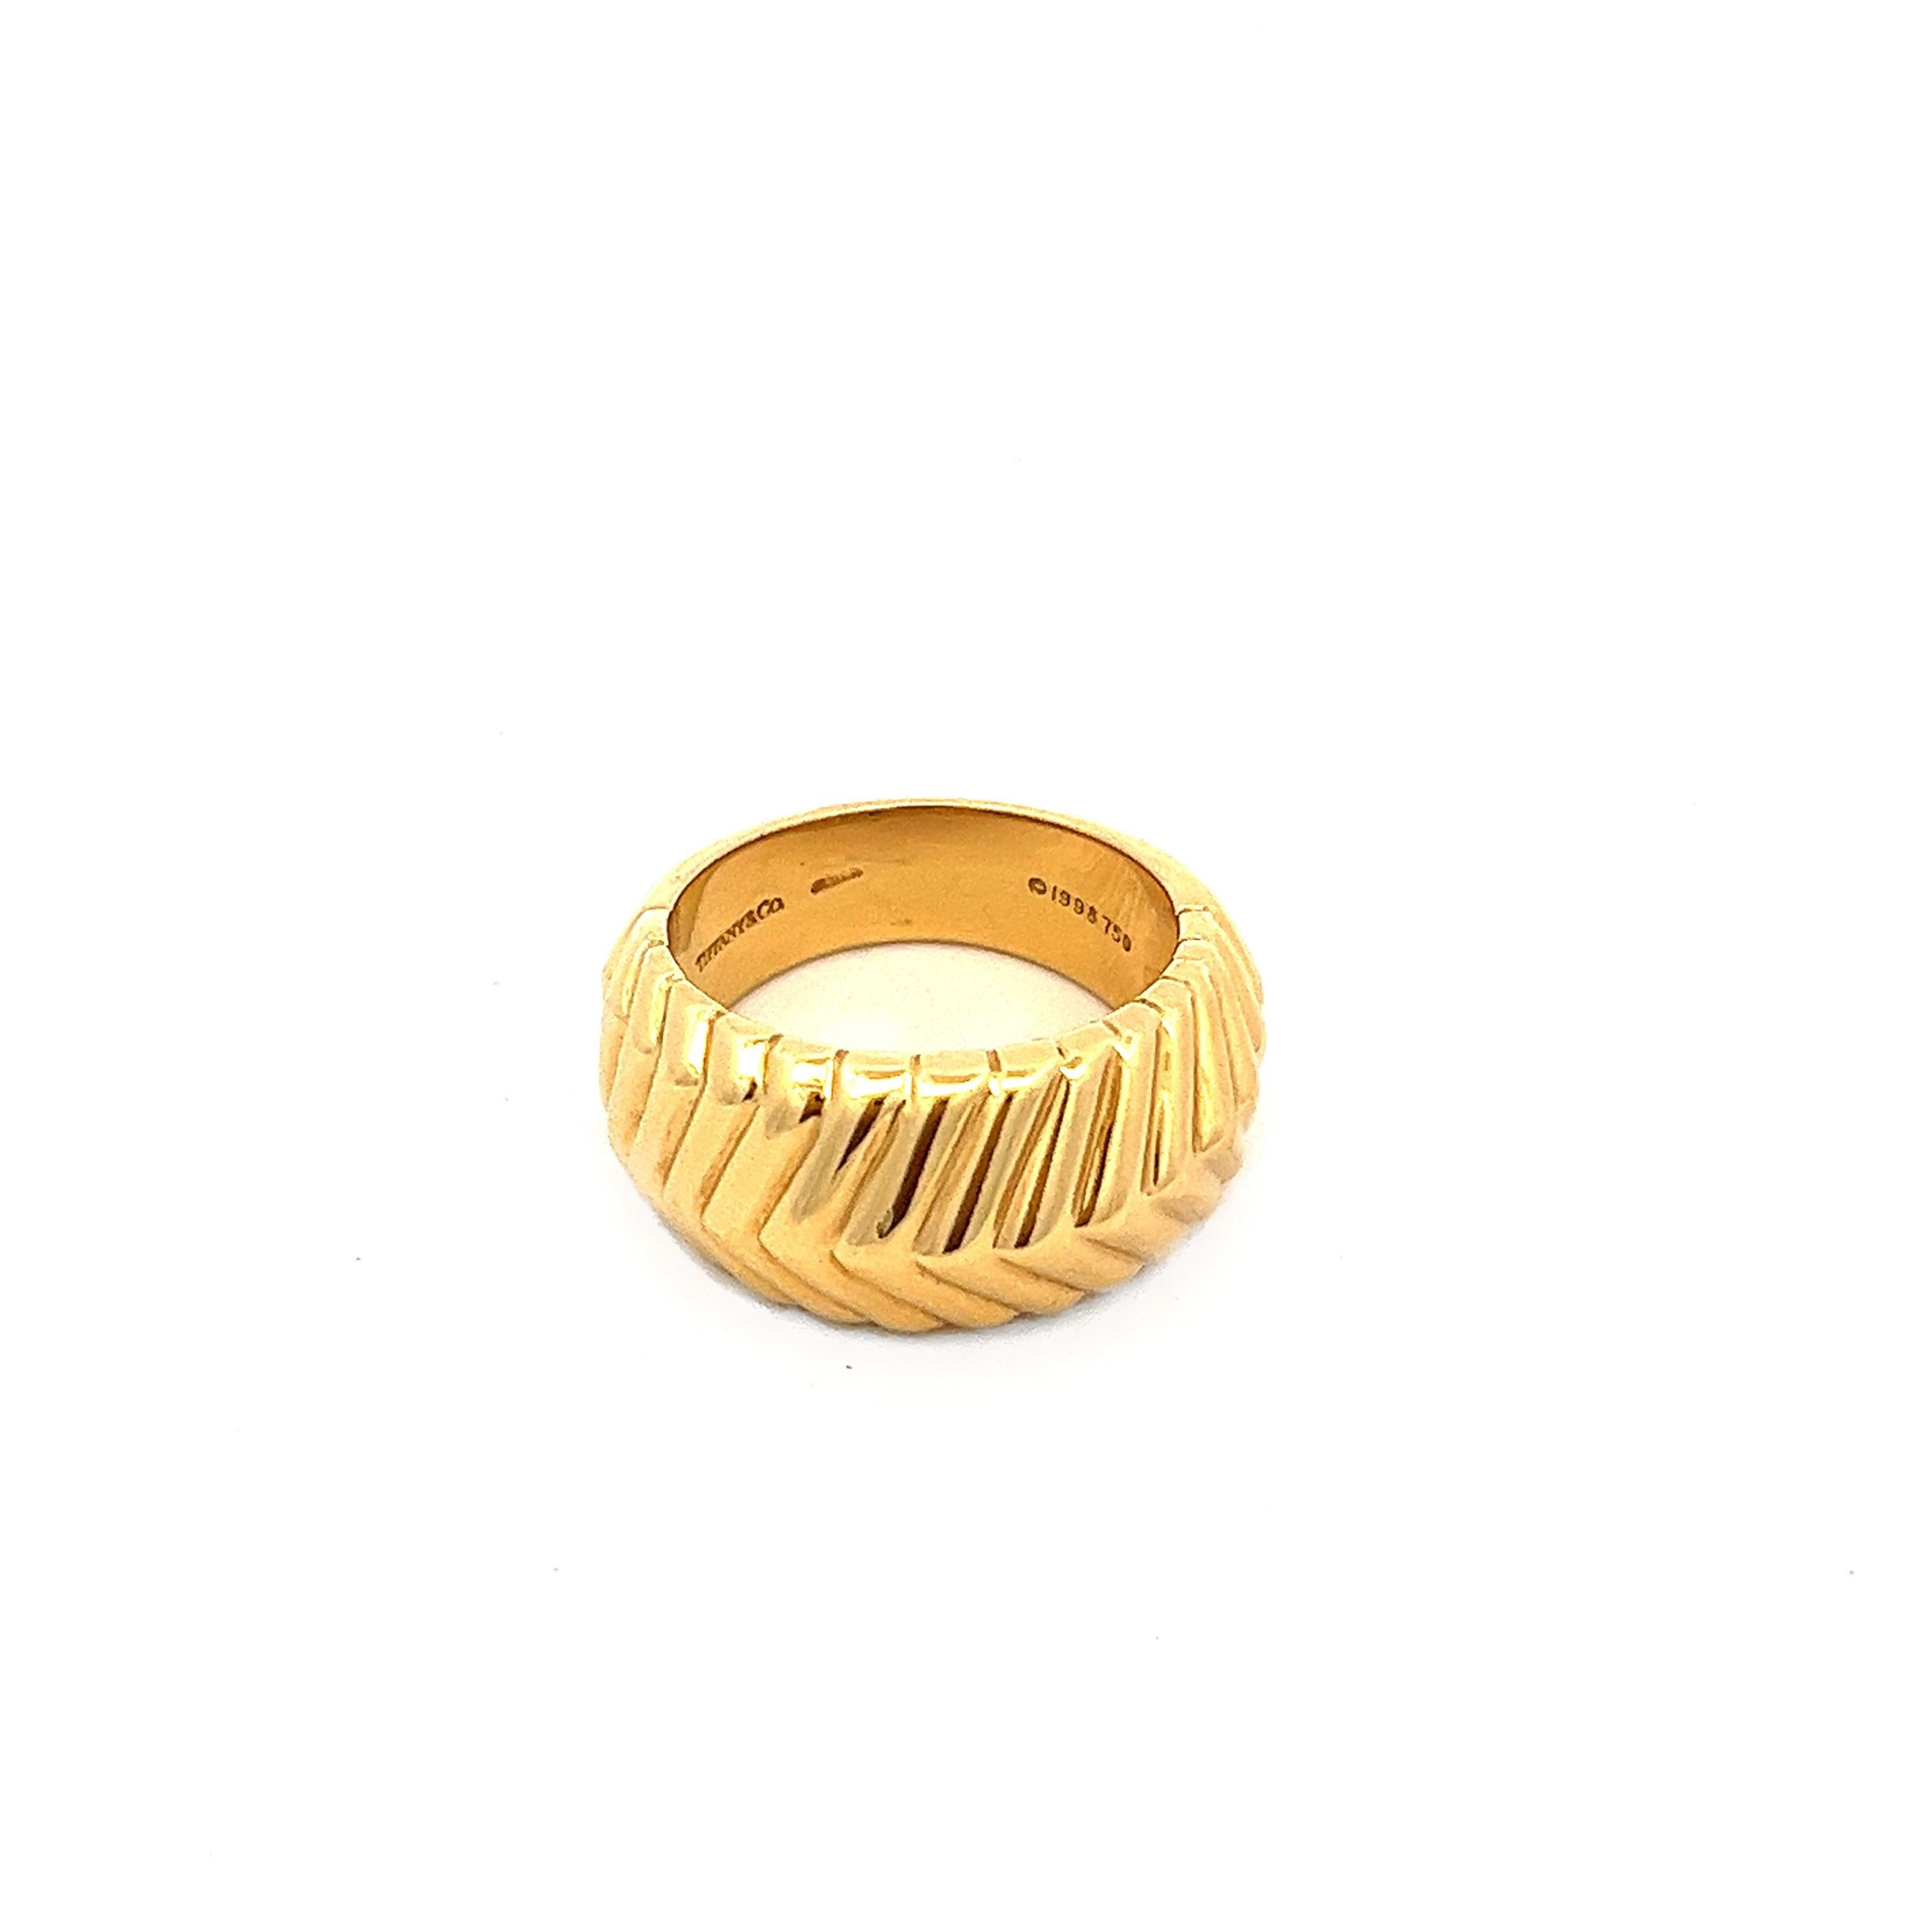 Tiffany & Co. Cordis 18 Karat Yellow Gold Chevron Band Ring In Good Condition For Sale In Fairfield, CT